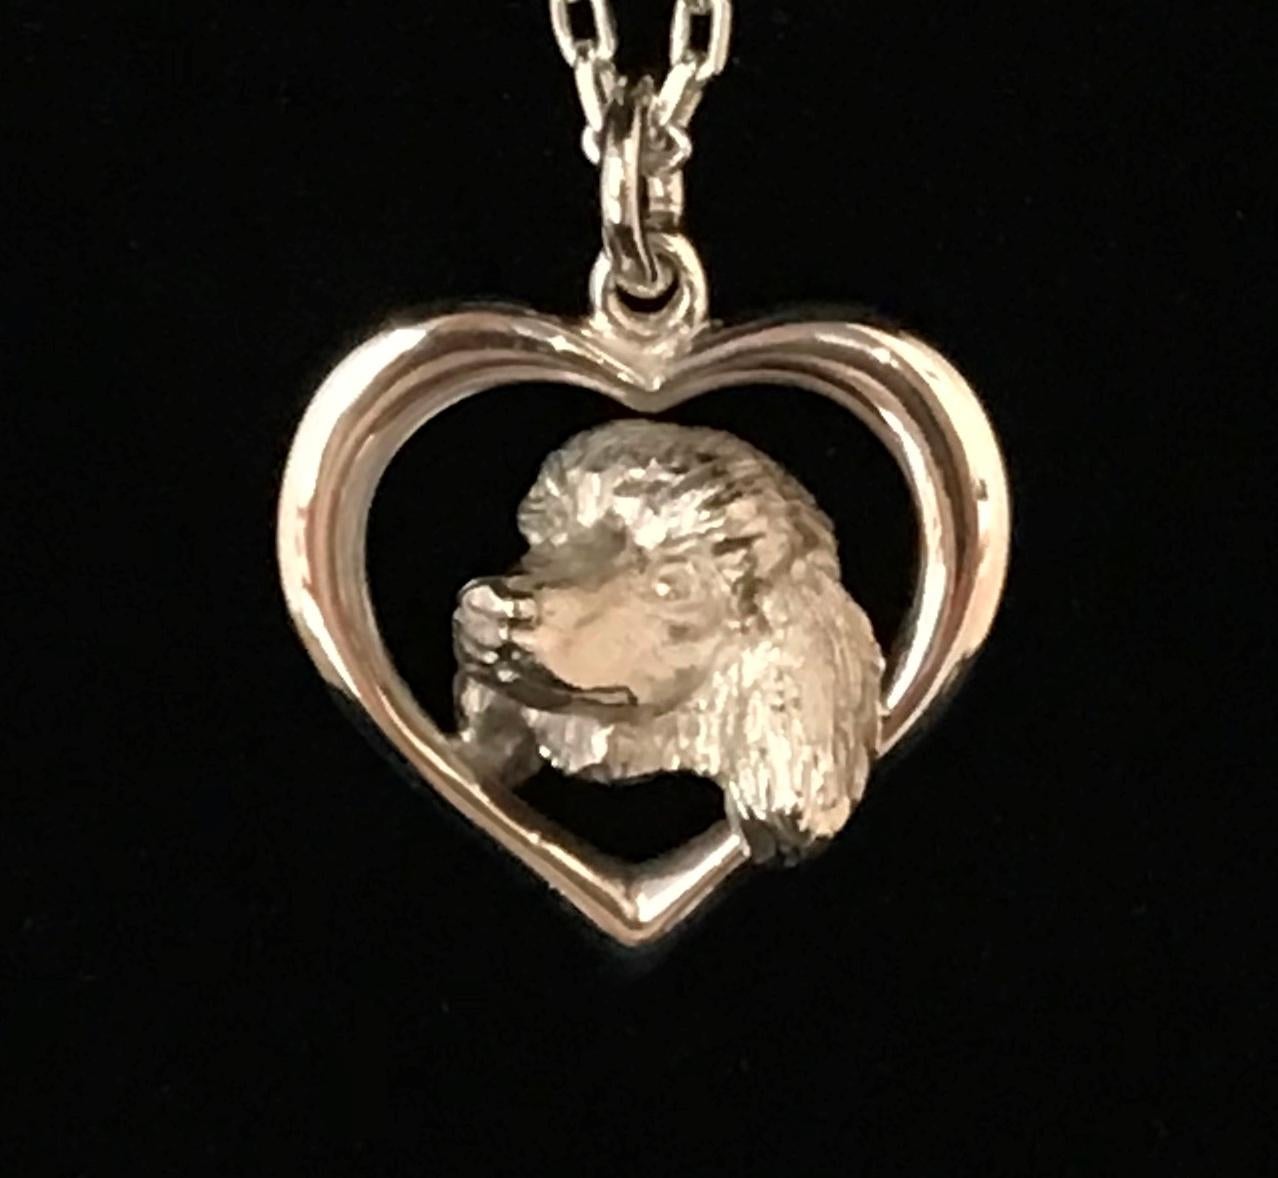 From Great Britain Paul Eaton VPRMS MAA hand carved a Poodle pendant an elegant sterling-silver miniature dog sculpture made into a jewelry piece you can wear close to your heart. The title of the pendant is 